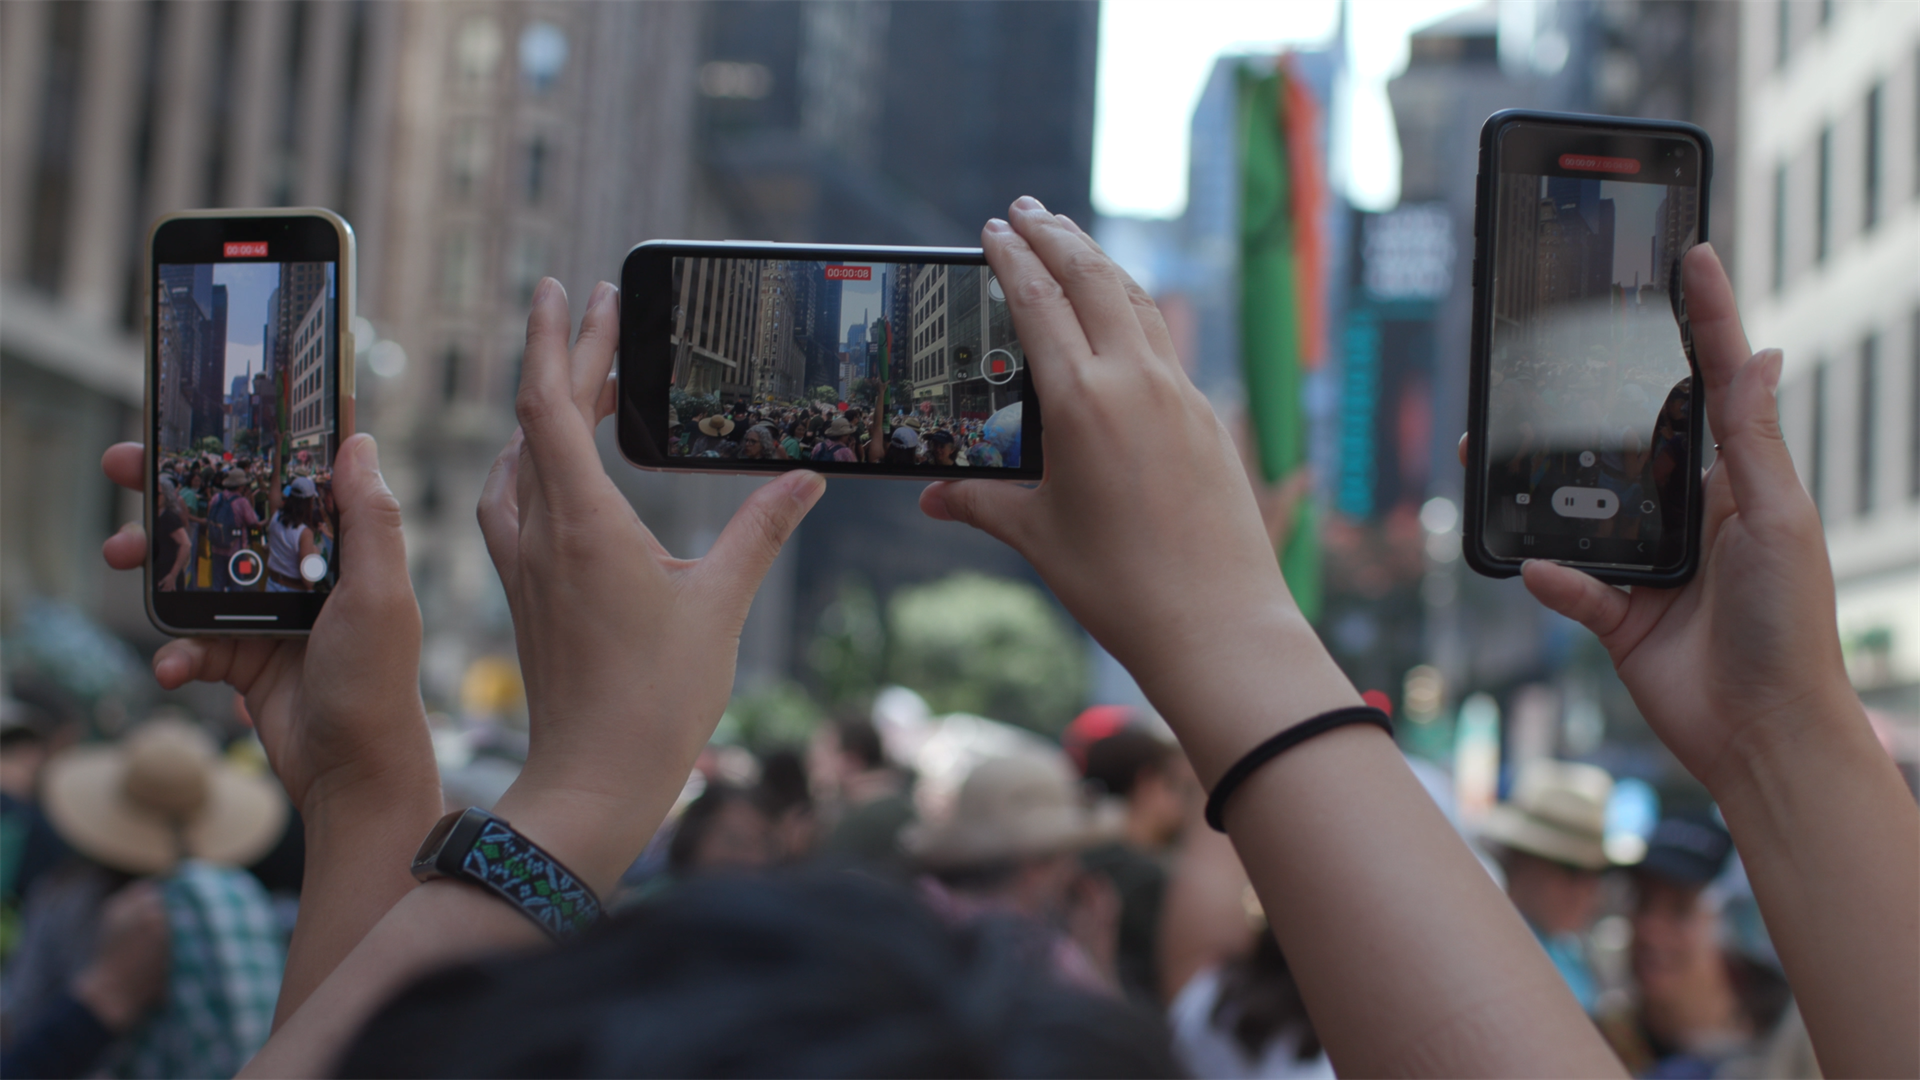 Hands of individuals holding smartphones, capturing a climate protest.